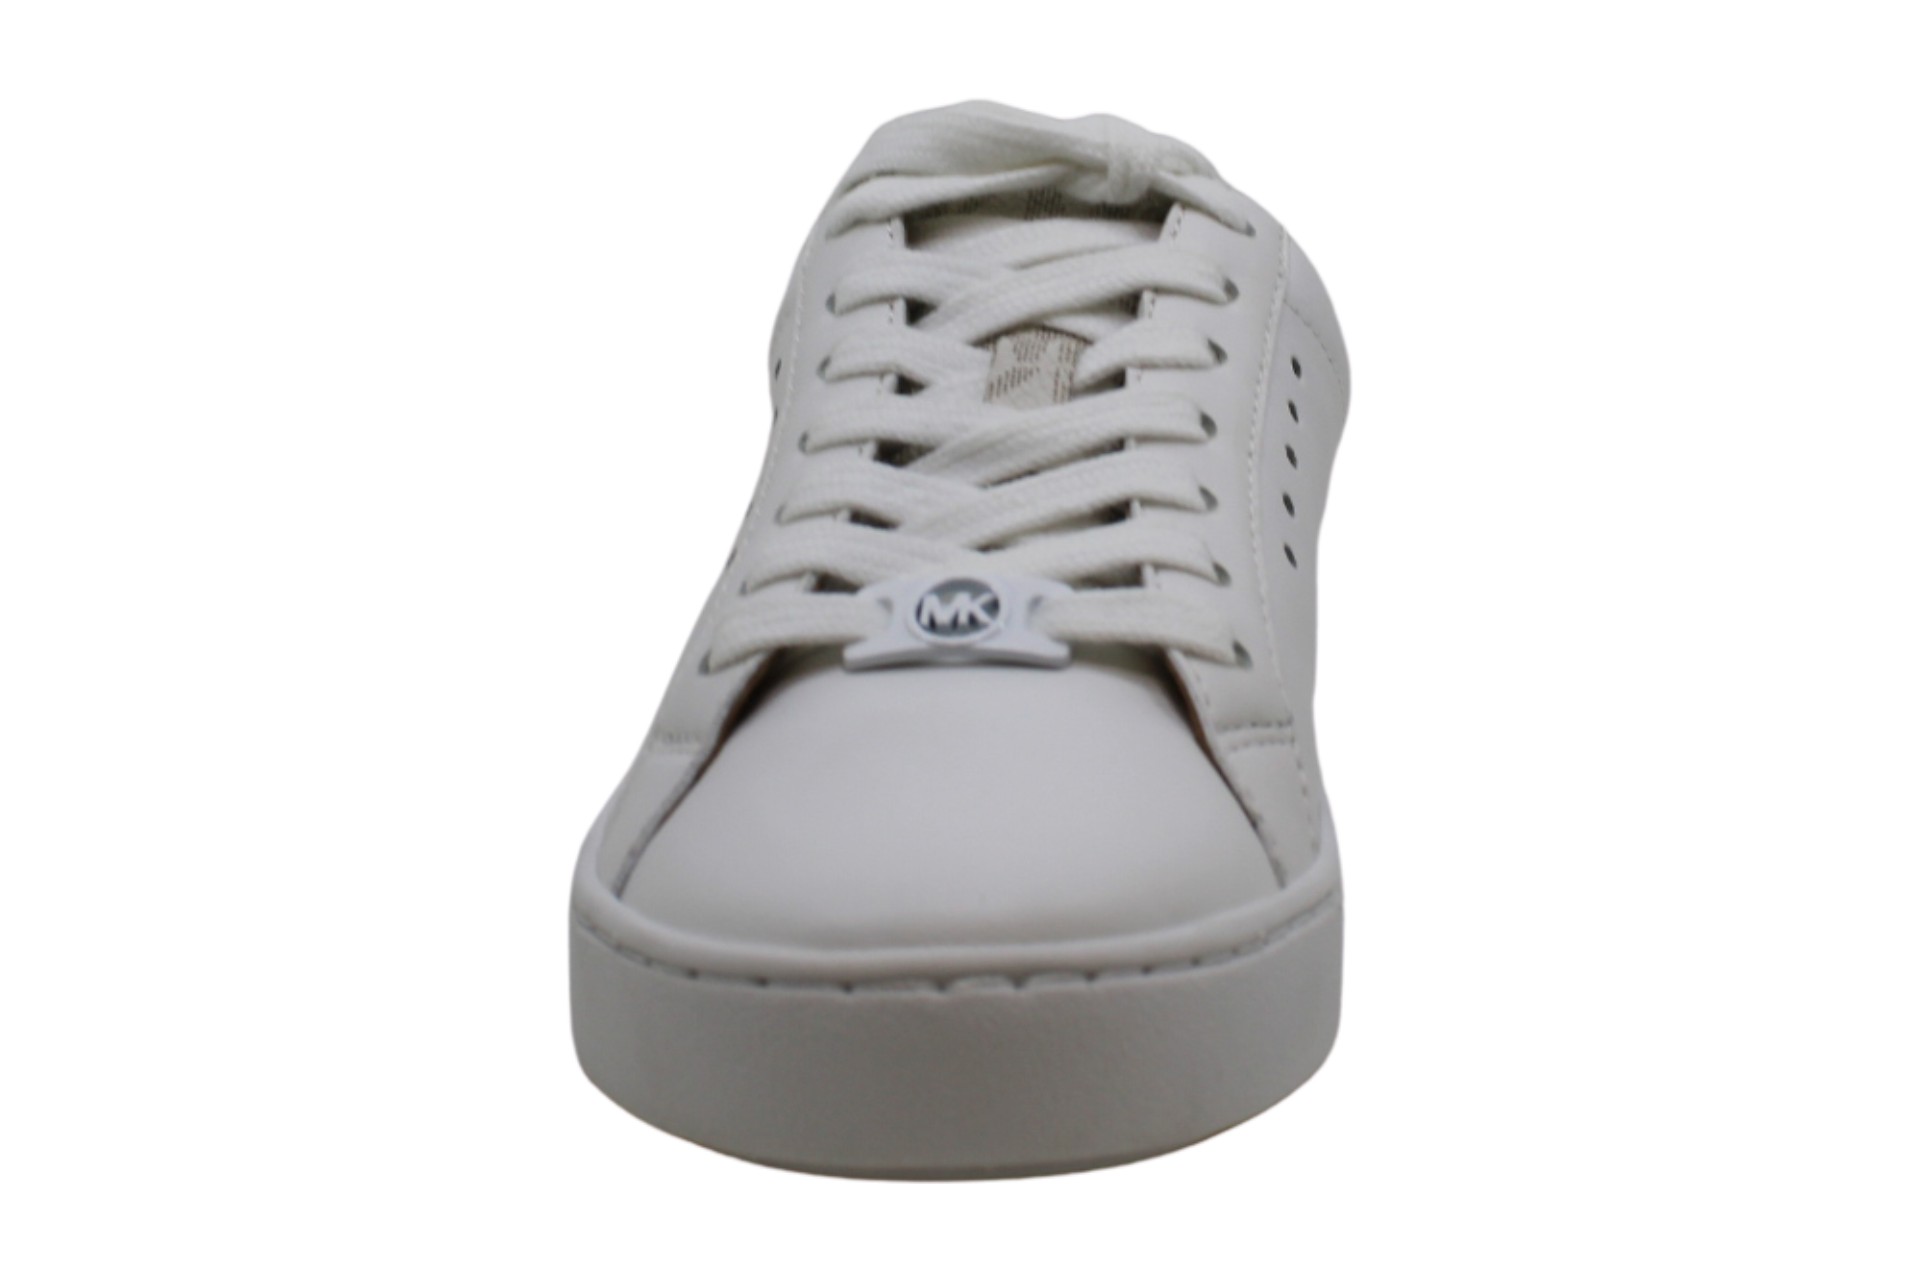 Michael Michael Kors Womens Fashion Sneakers in White Color, Size 5.5 ...